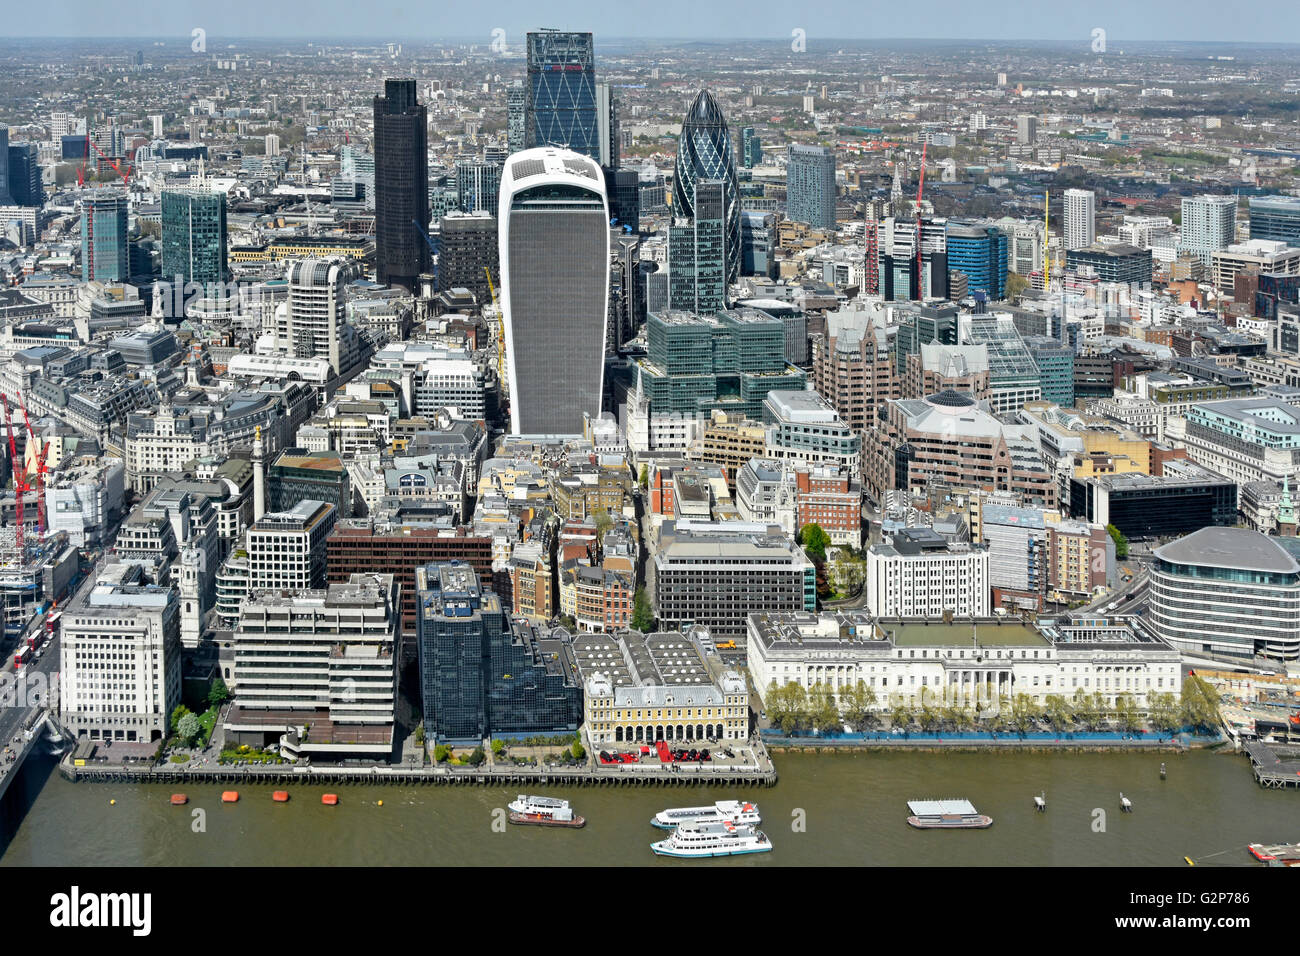 City of London landmarks aerial view from above looking down at London skyline modern skyscraper cityscape in an urban landscape Stock Photo